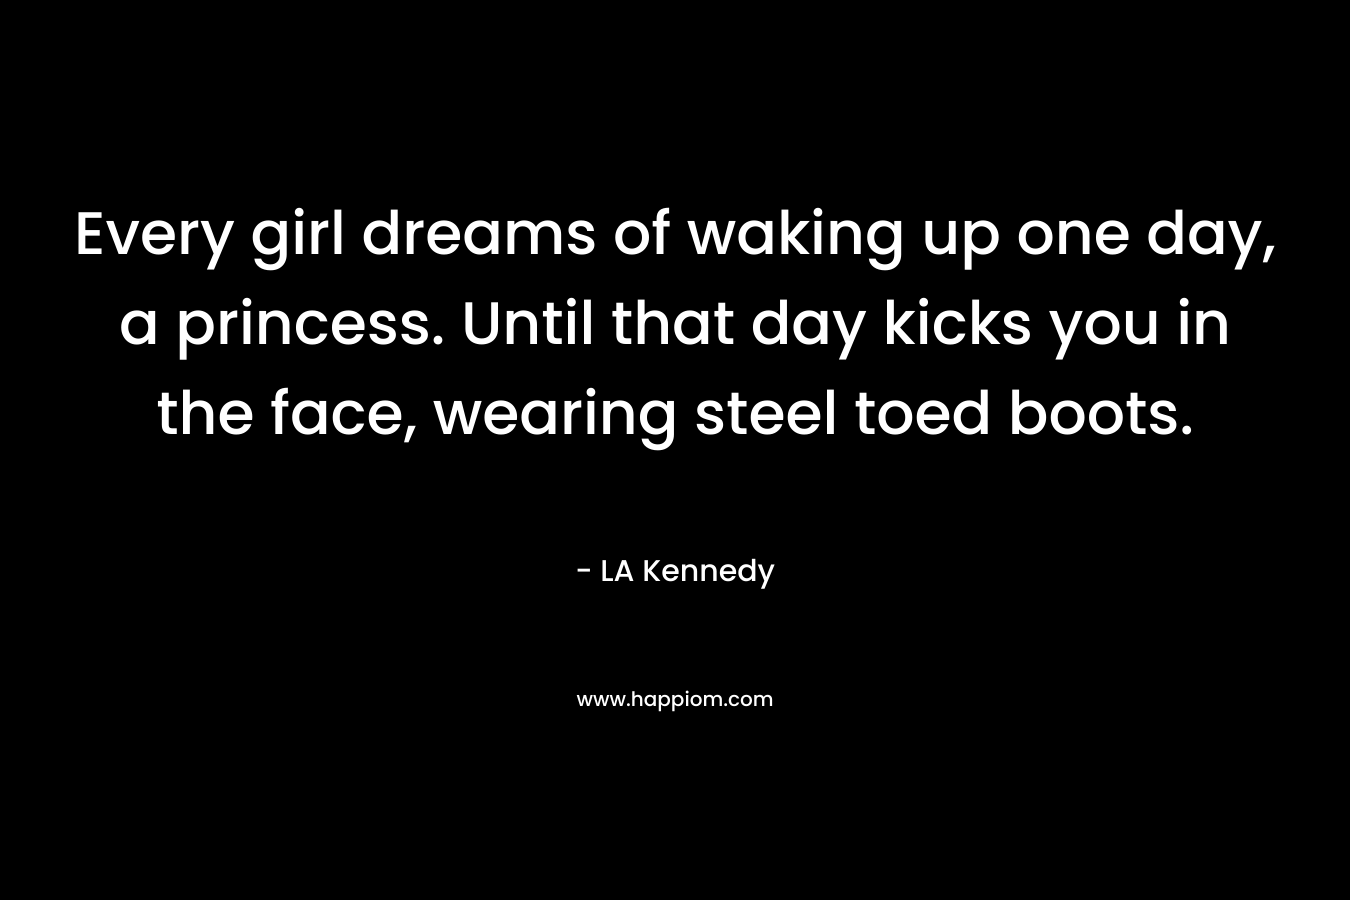 Every girl dreams of waking up one day, a princess. Until that day kicks you in the face, wearing steel toed boots. – LA Kennedy